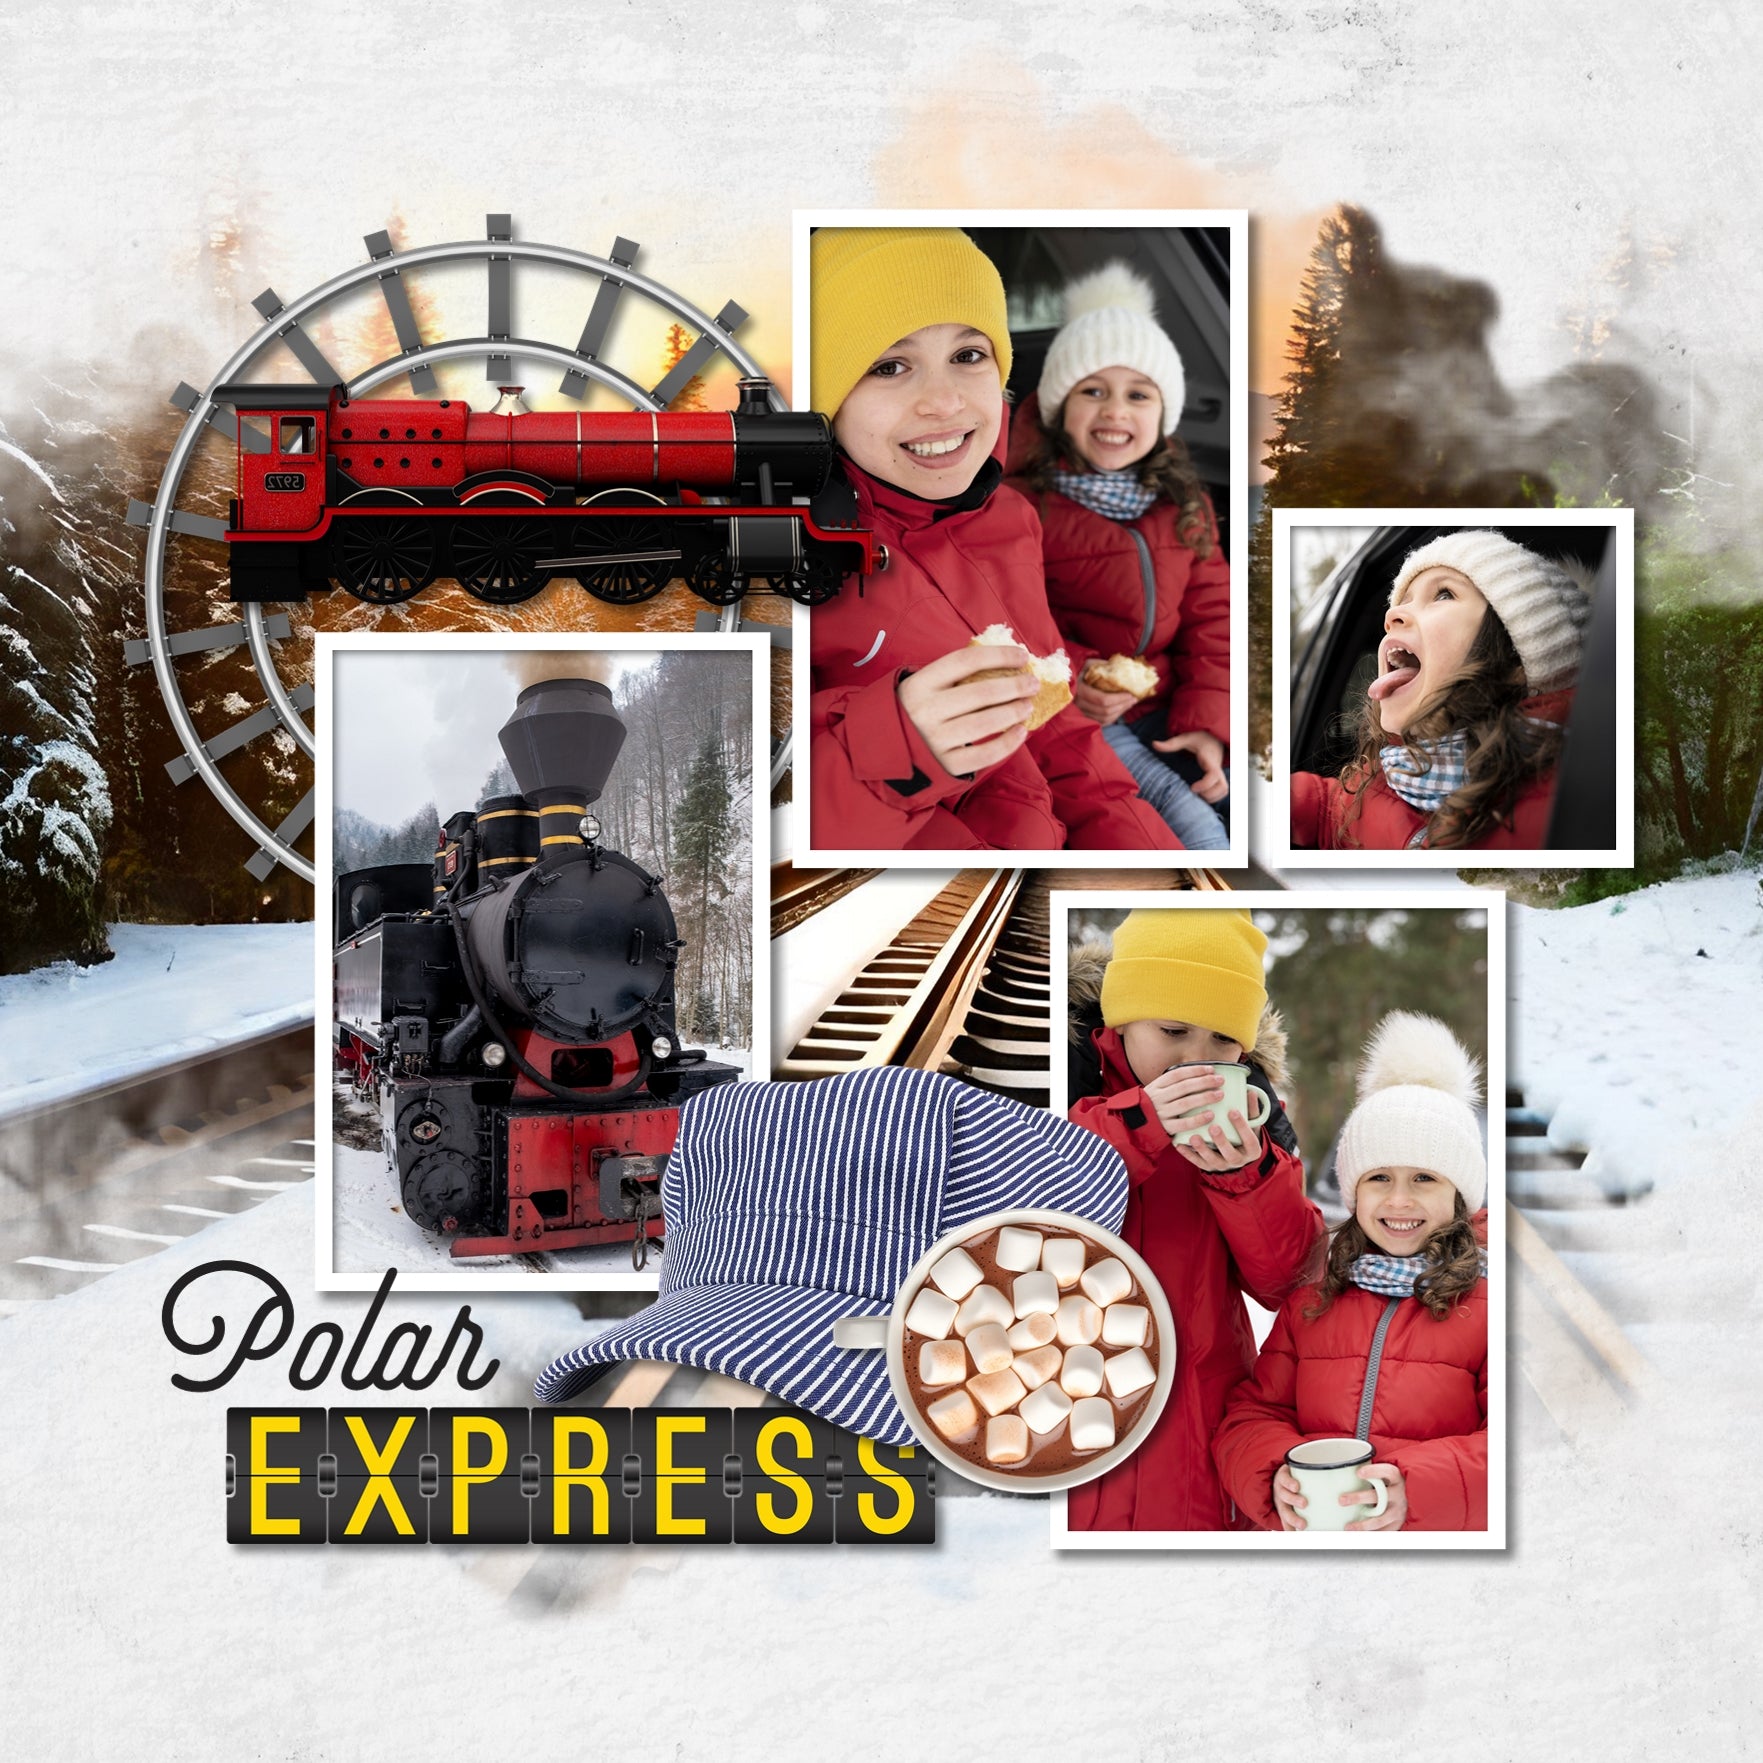 Choo-Choo! These grunge digital scrapbooking papers by Lucky Girl Creative are your ticket to ride on any page featuring train travel, railroad adventures, subway, tram, cable car, metro, and locomotive museums. Great for everyday pages and scrapbook albums, too!